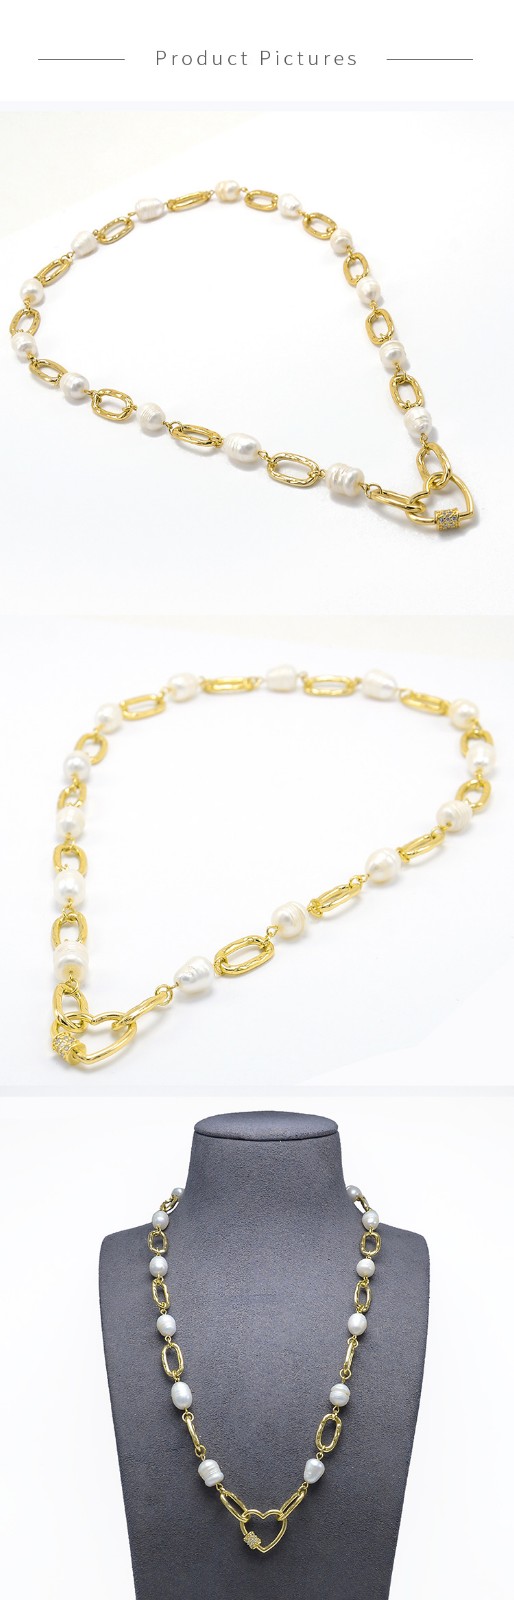 Heart Carabiner Pearl Gold Chian Necklace